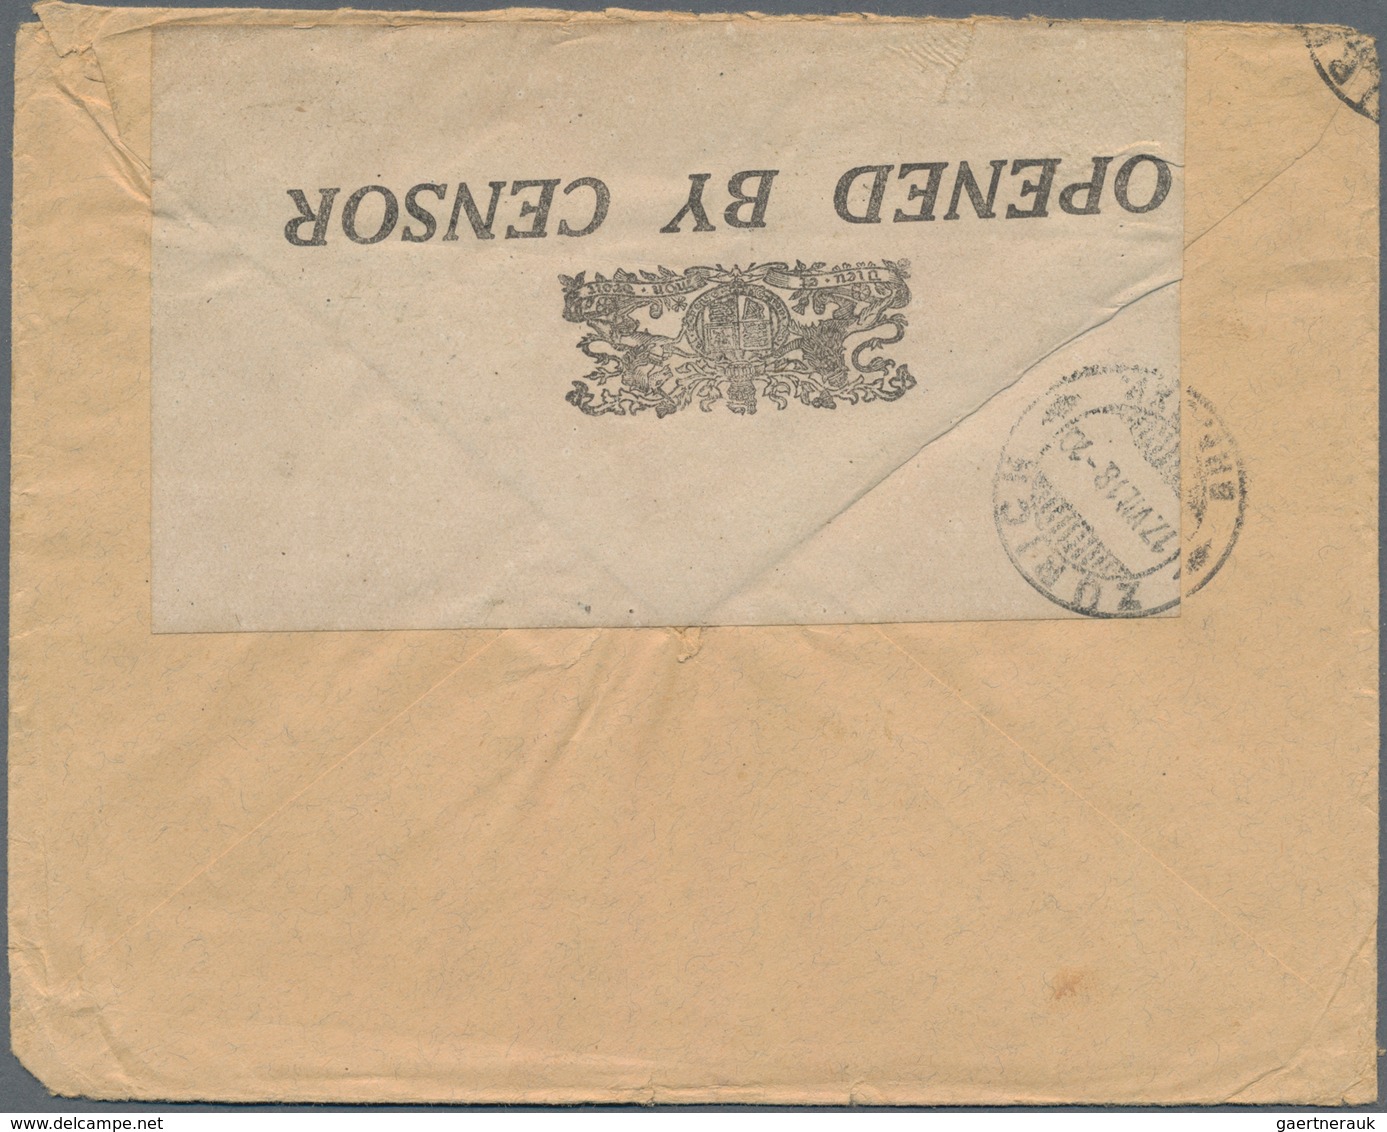 Indien - Feldpost: 1918 Registered And Censored Cover From Baghdad To Zurich, Switzerland Via Italy - Military Service Stamp